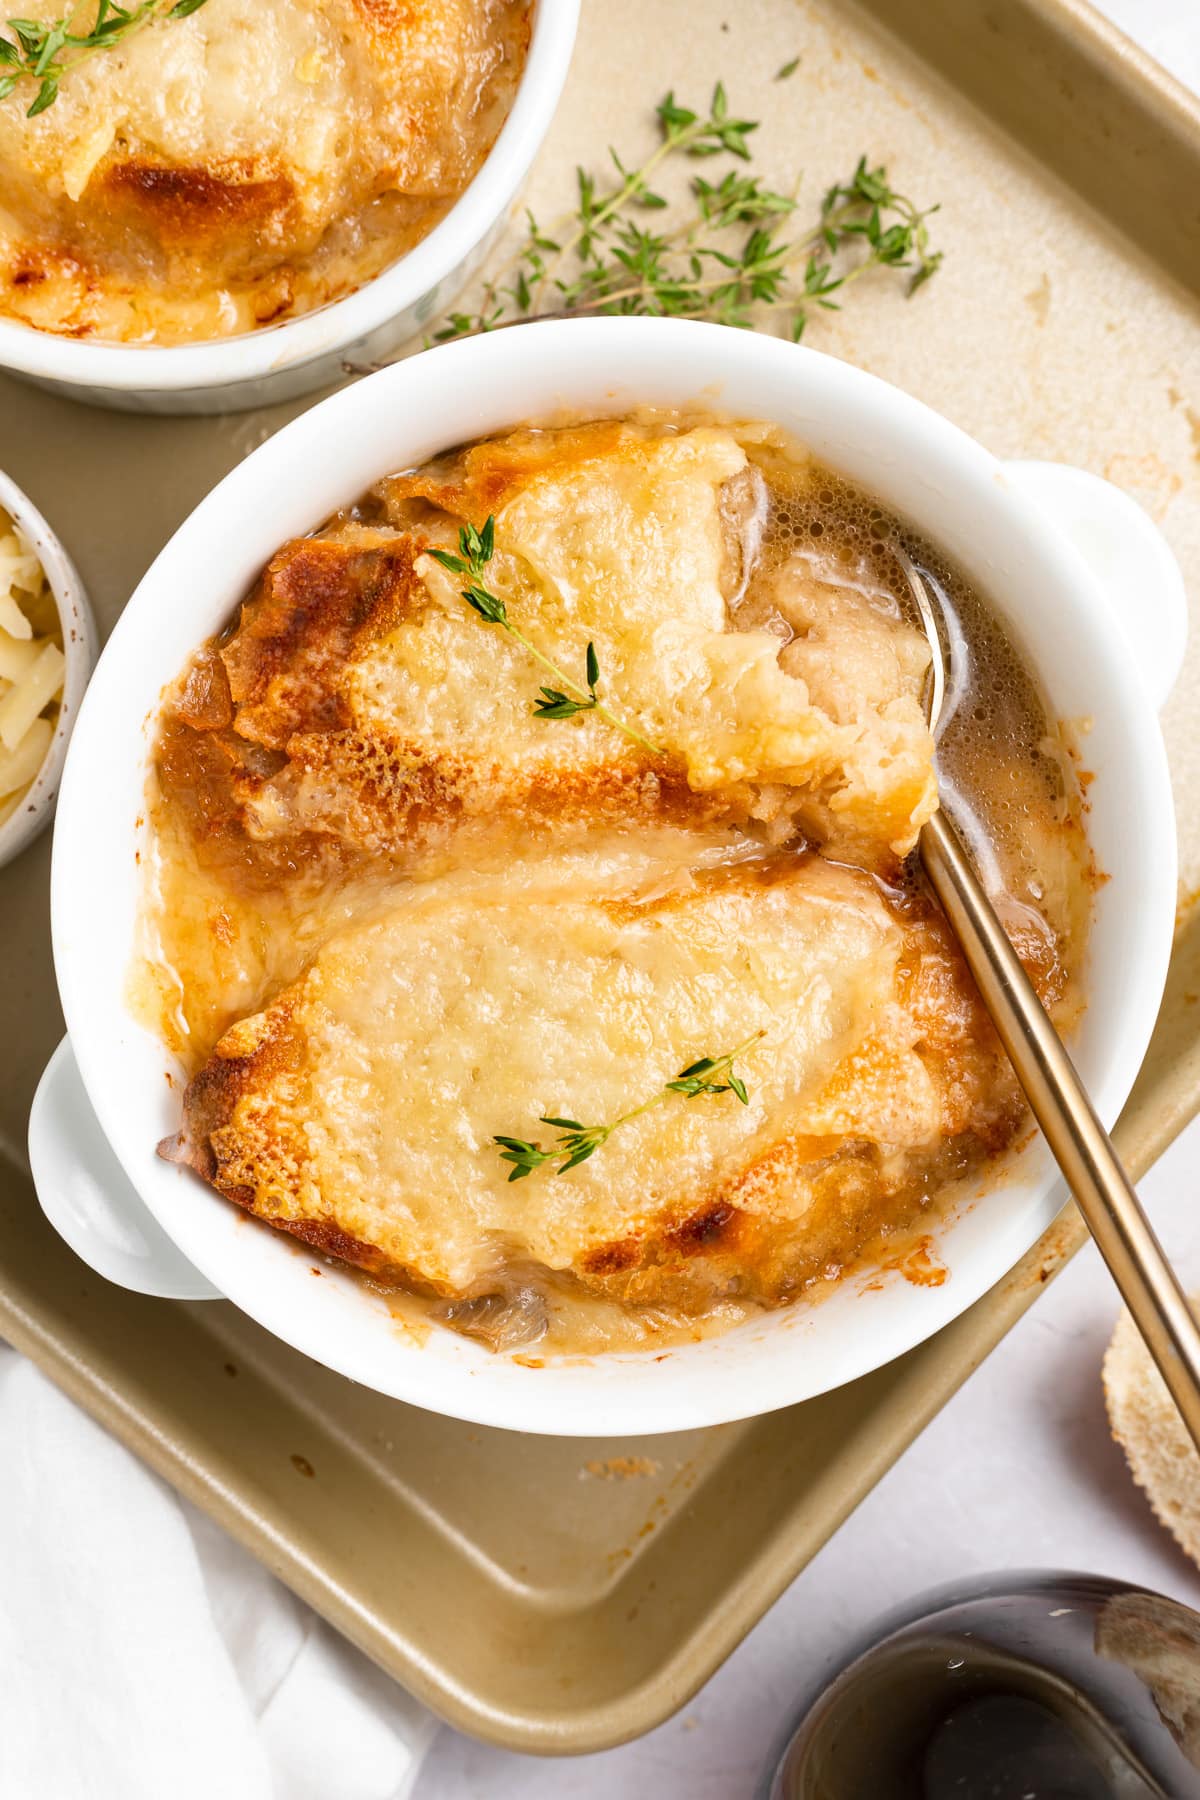 Top-down look at a large ramekin of Instant Pot French Onion soup topped with French bread and melted Gruyère cheese.